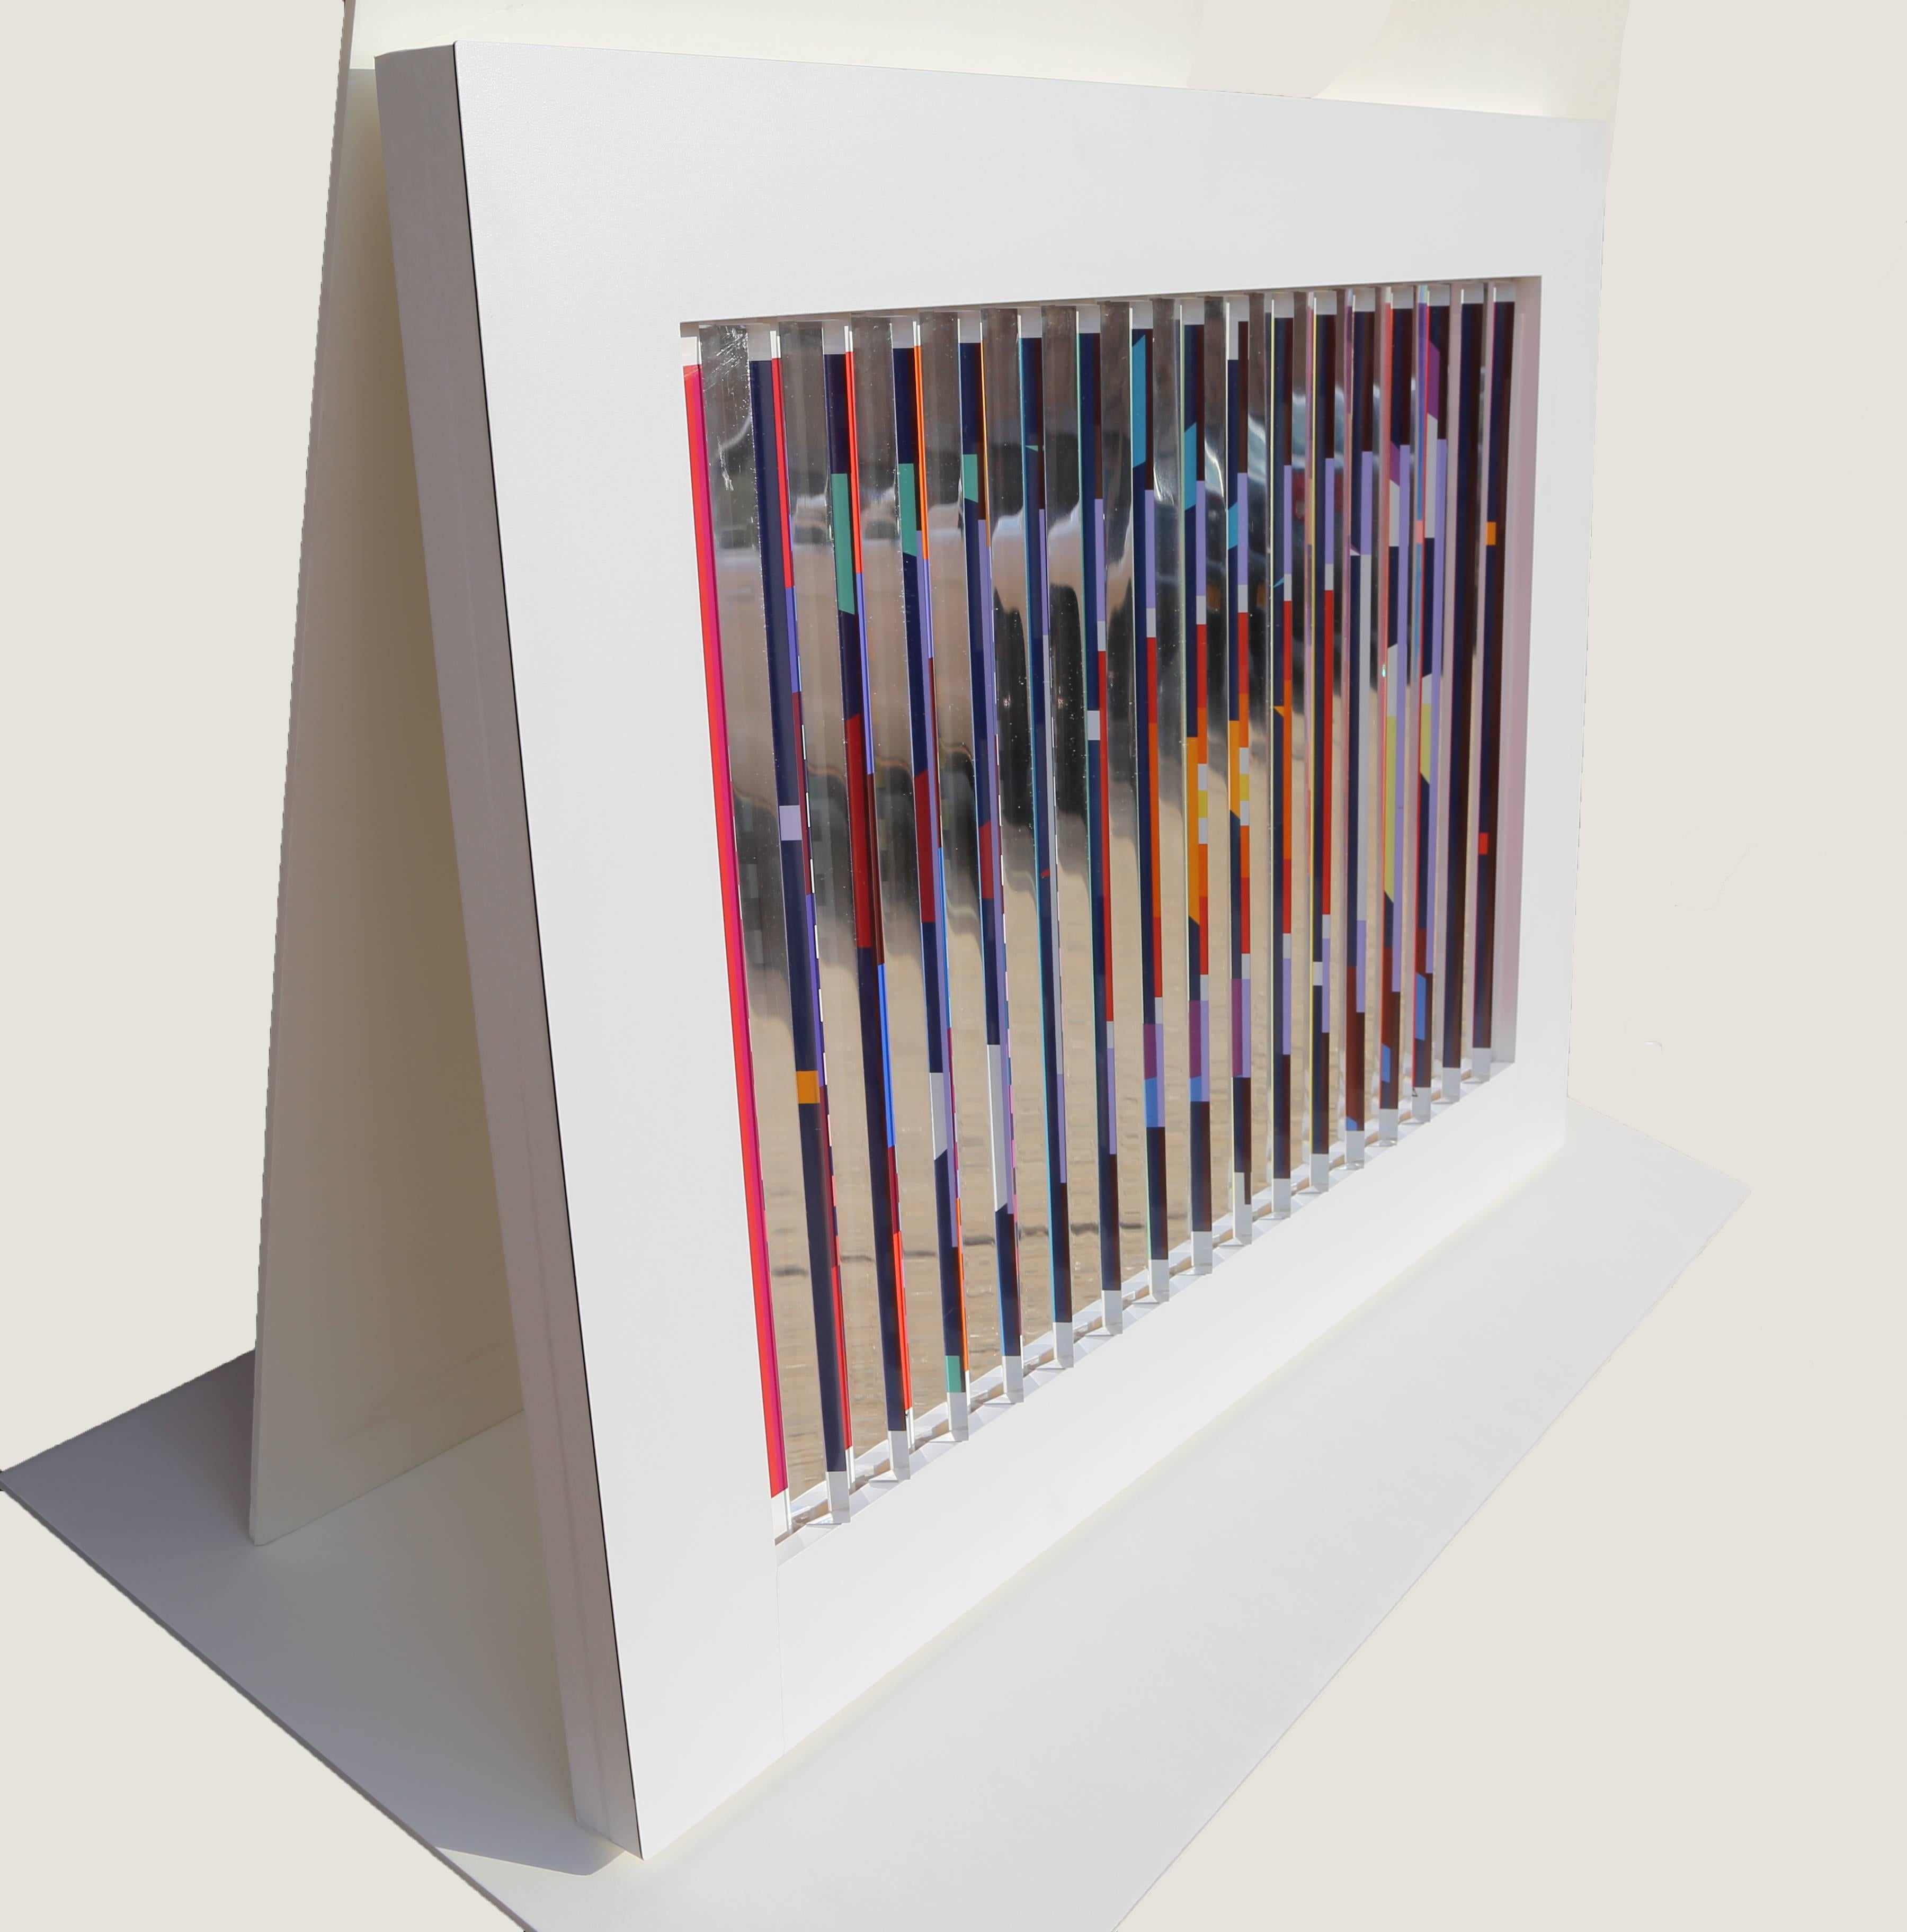 Midnight Blue, Prismagraph 3-D Wall Sculpture by Yaacov Agam 2